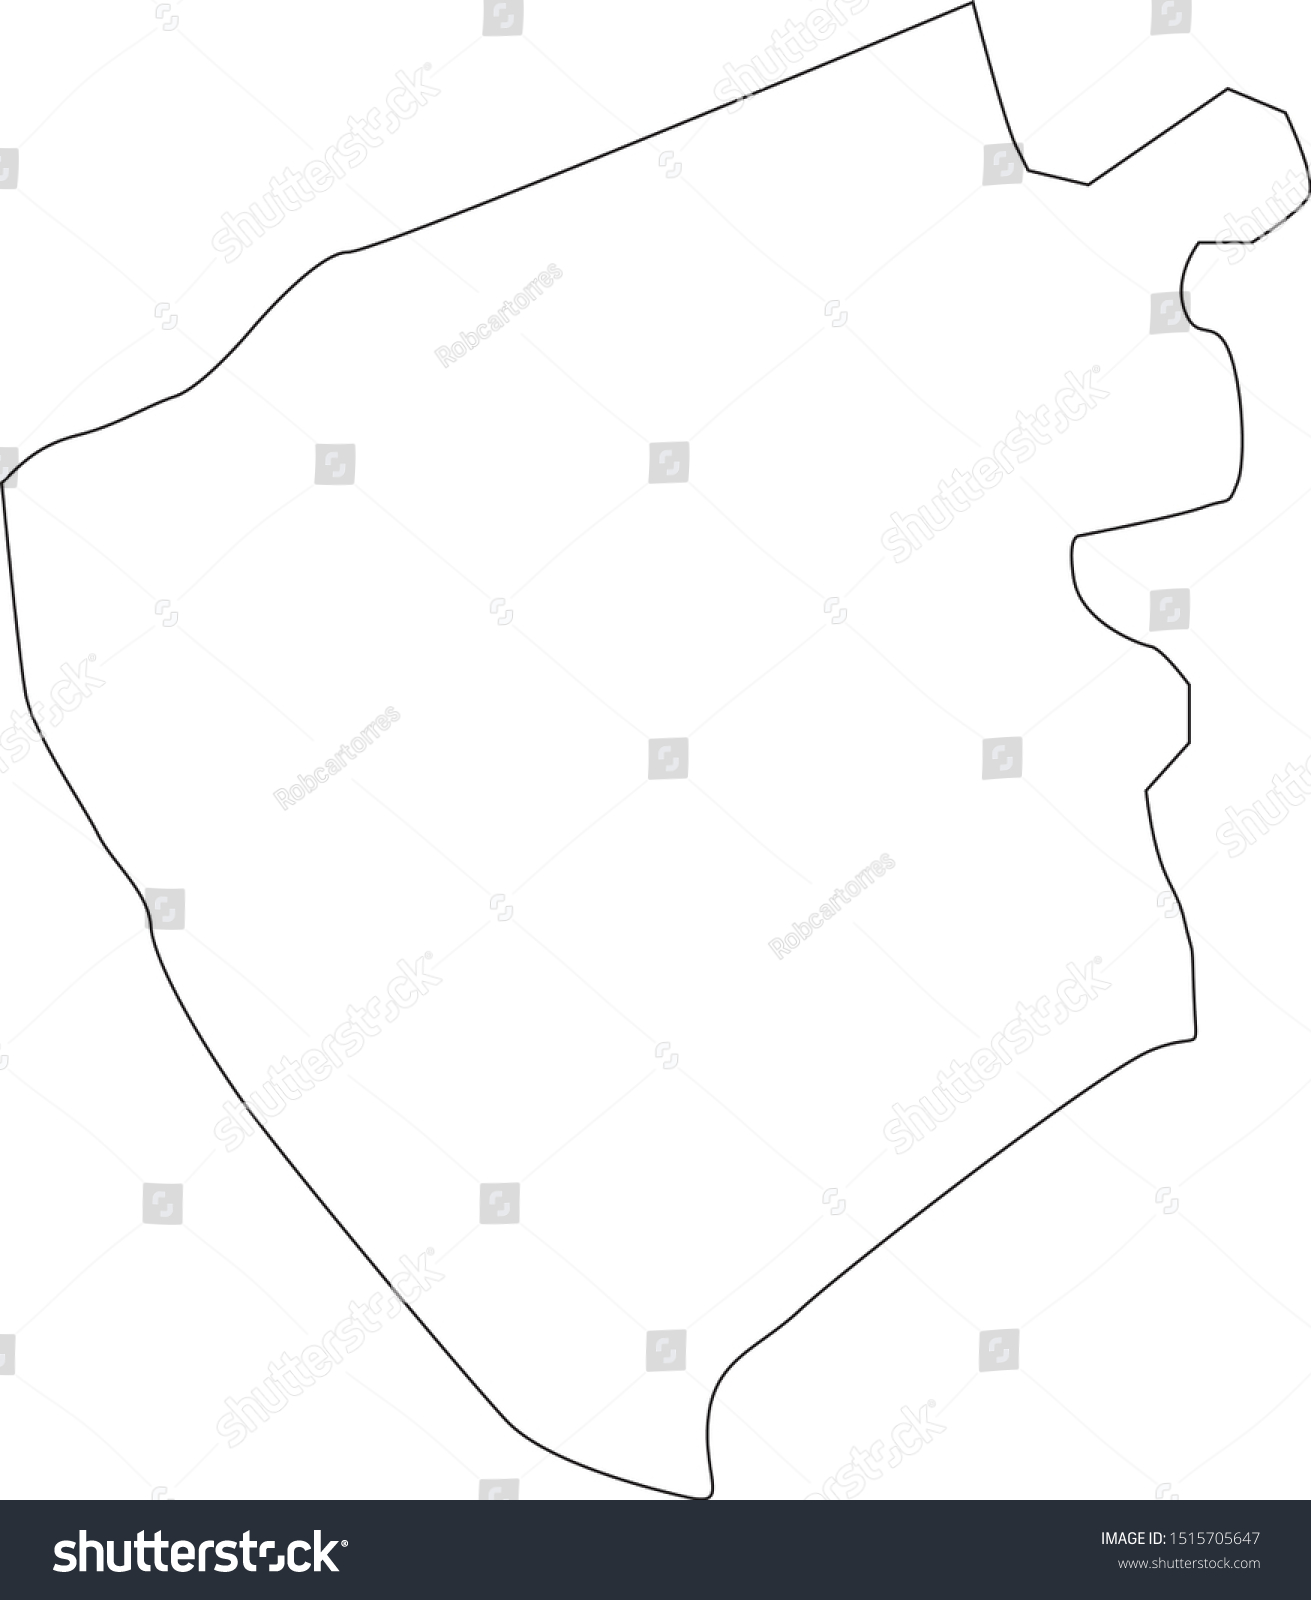 Pulaski County Map In State Of Virginia Royalty Free Stock Vector 1515705647 3354